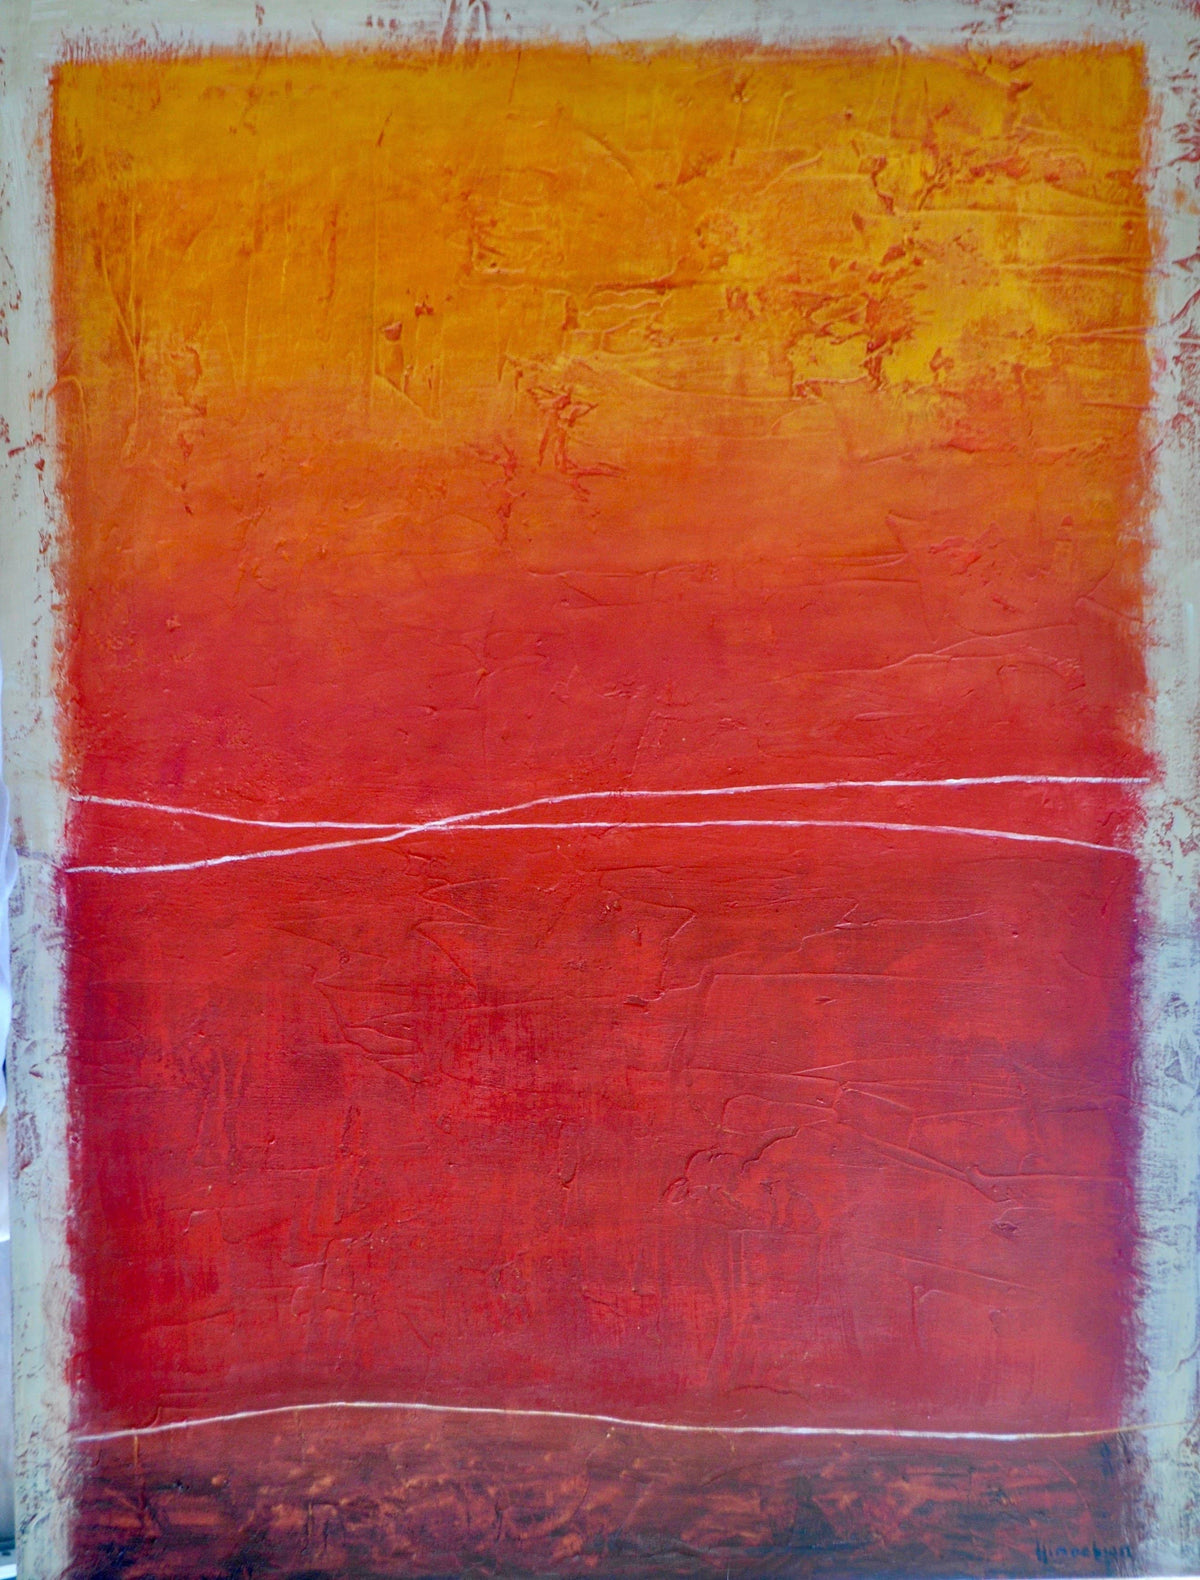 Contemporary Abstract Art with Orange Sky and Red Sands like the desert